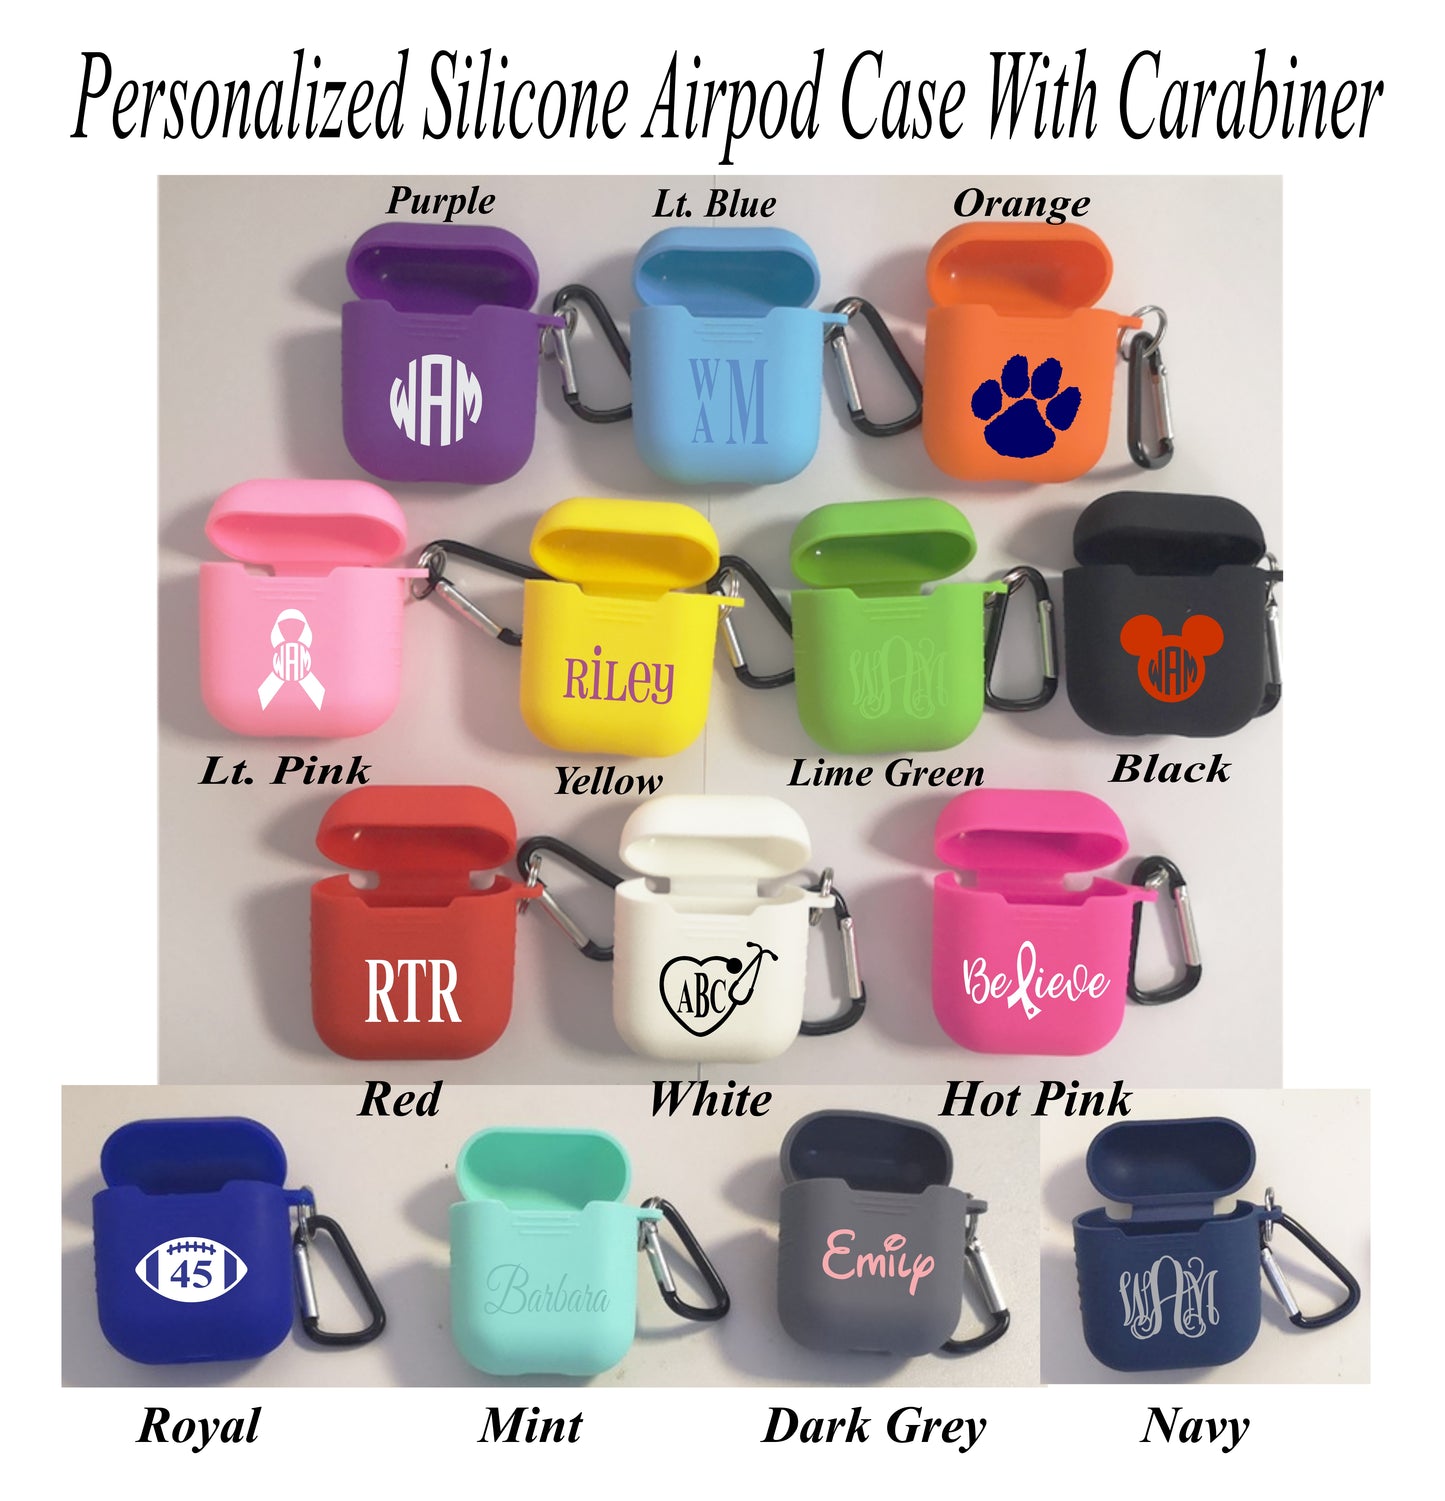 Silicone Apple Airpod Case (See product description to add engraving)